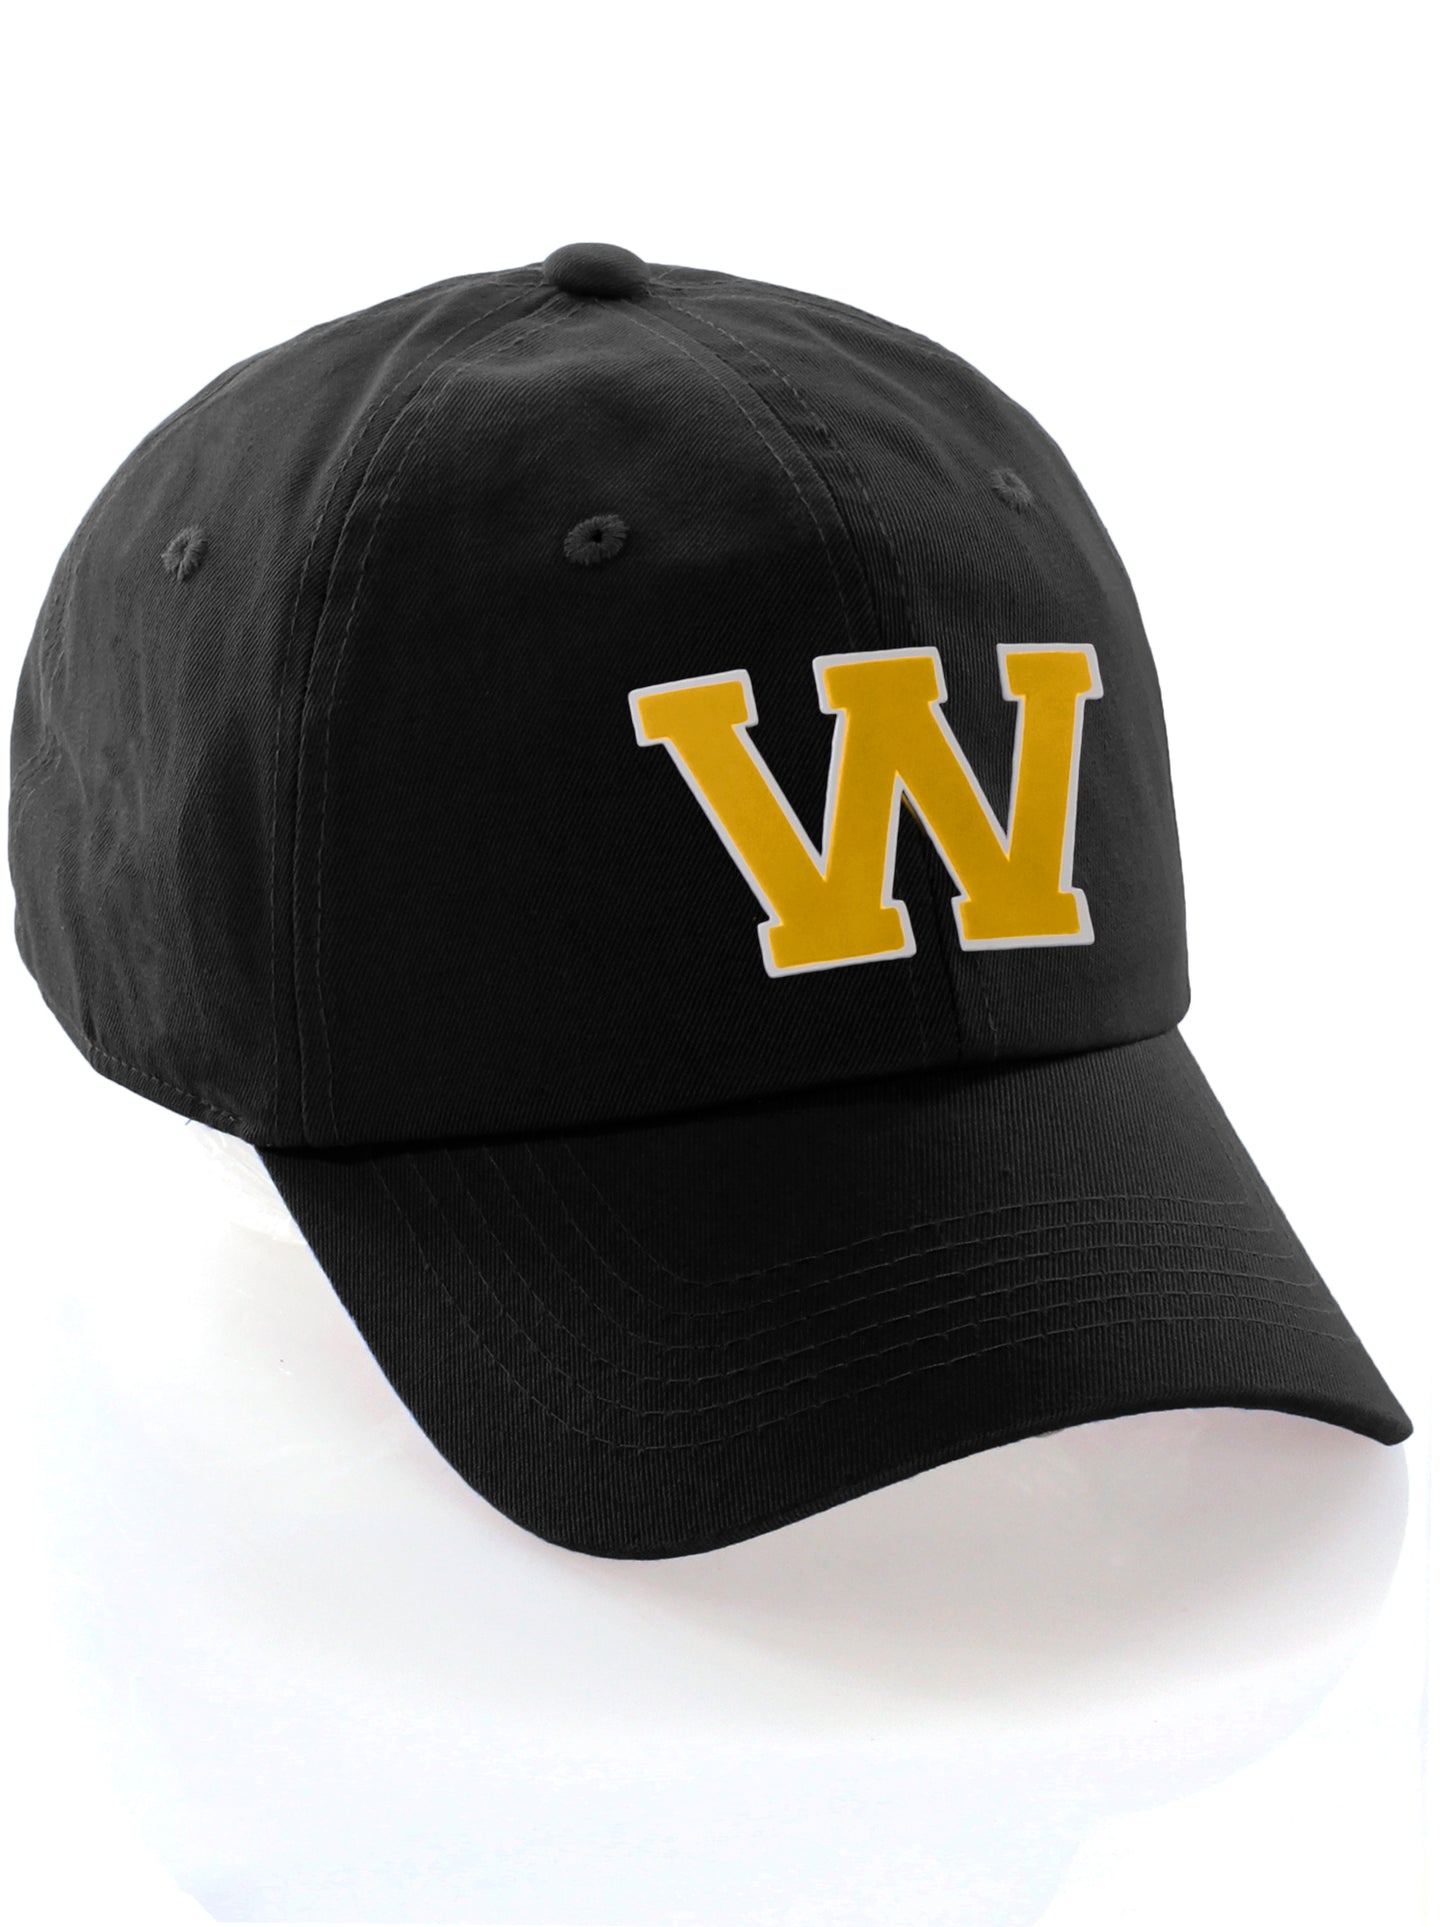 I&W Hatgear Customized Letter Initial Baseball Hat A to Z Team Colors, Black Cap White Gold